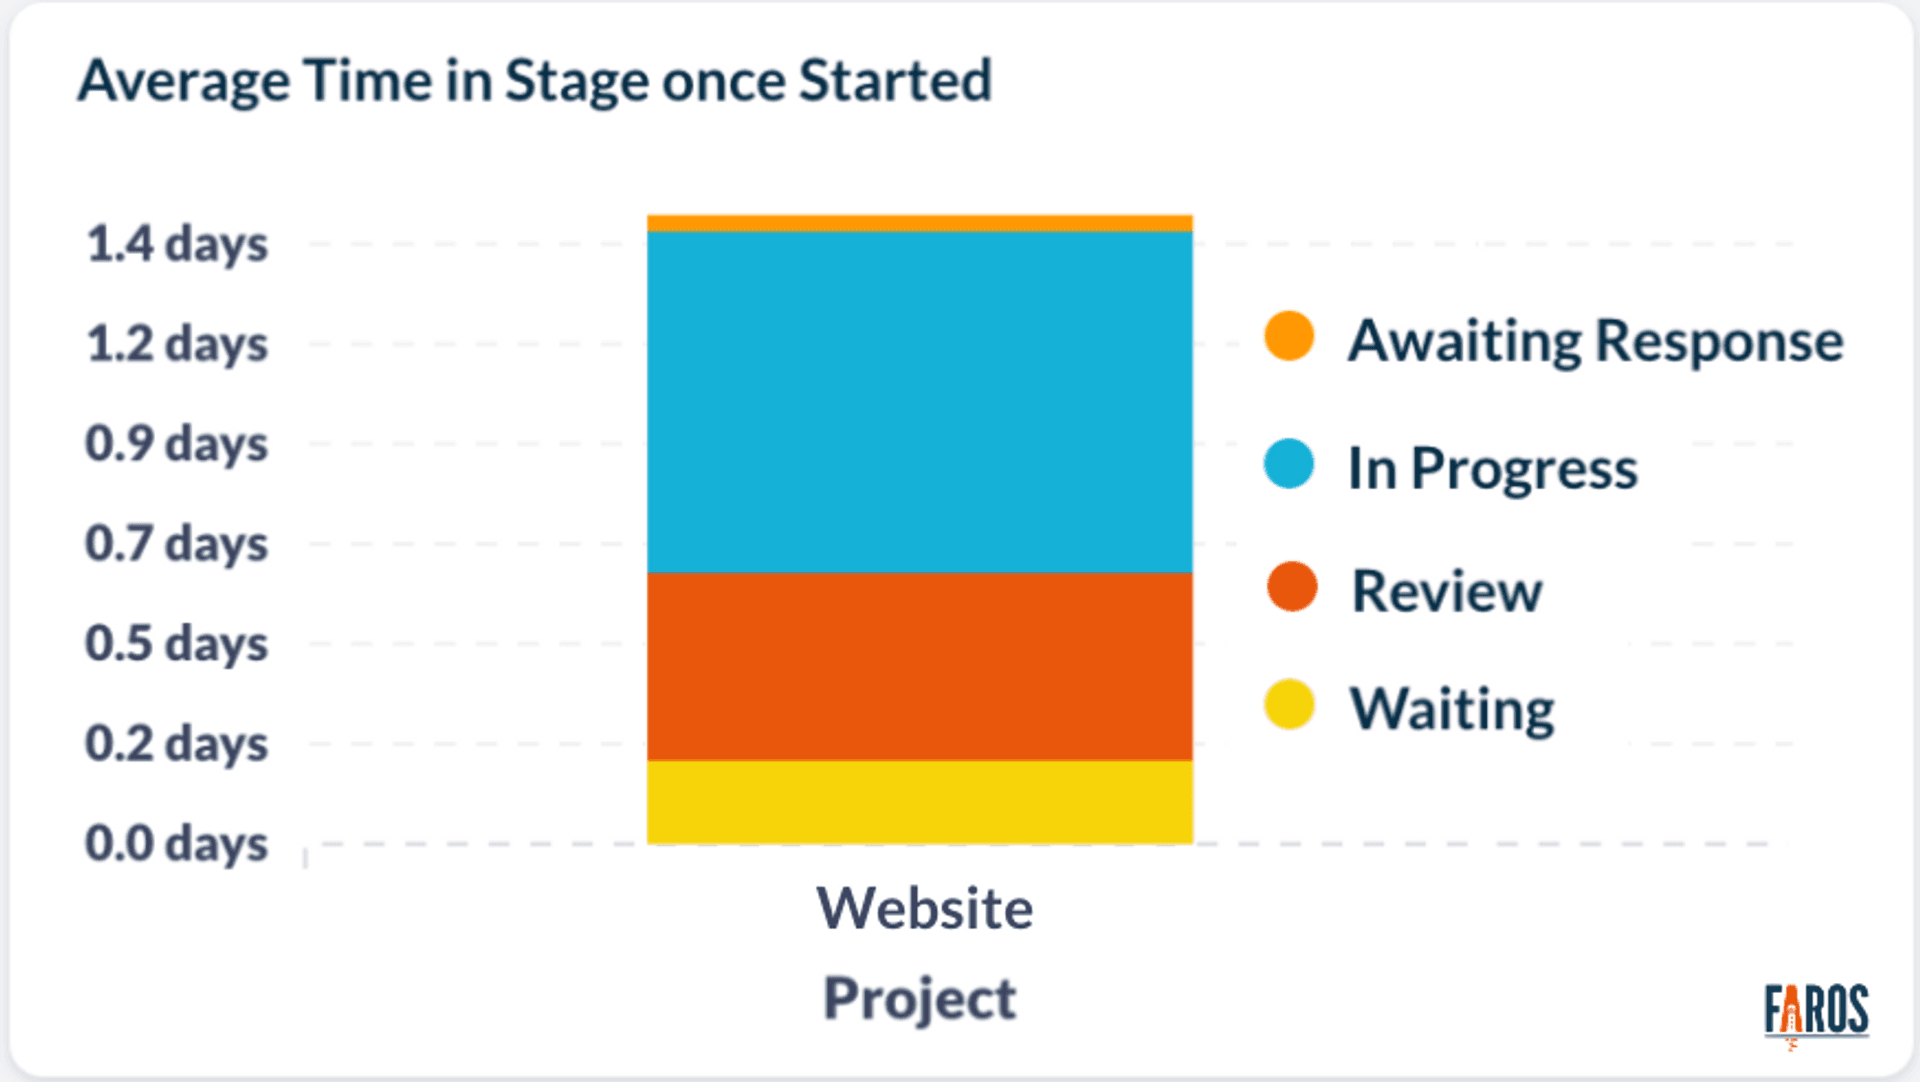 A stacked bar chart helps monitor the average time in stage (in days) for tasks in the 'waiting', 'review', 'in progress', or 'awaiting response' stages.